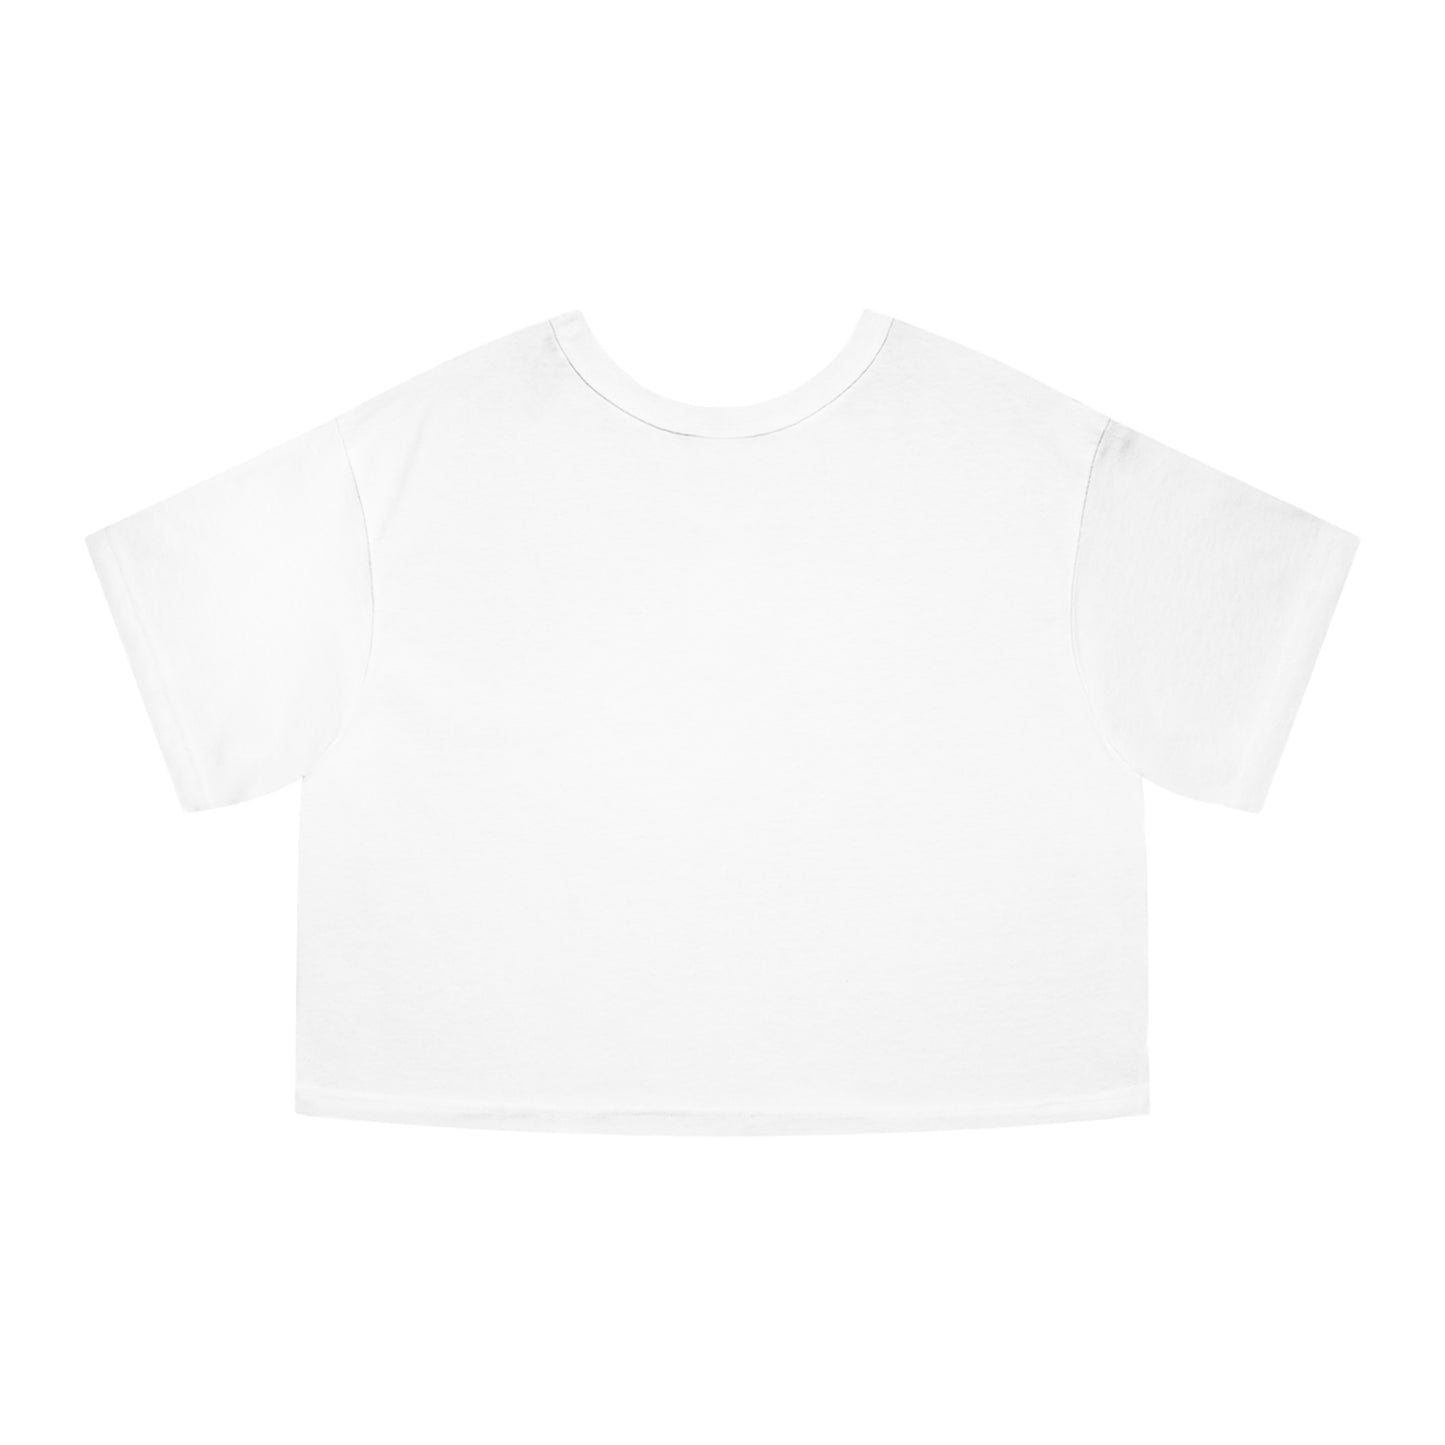 "I'm not like other girls" - Champion crop top